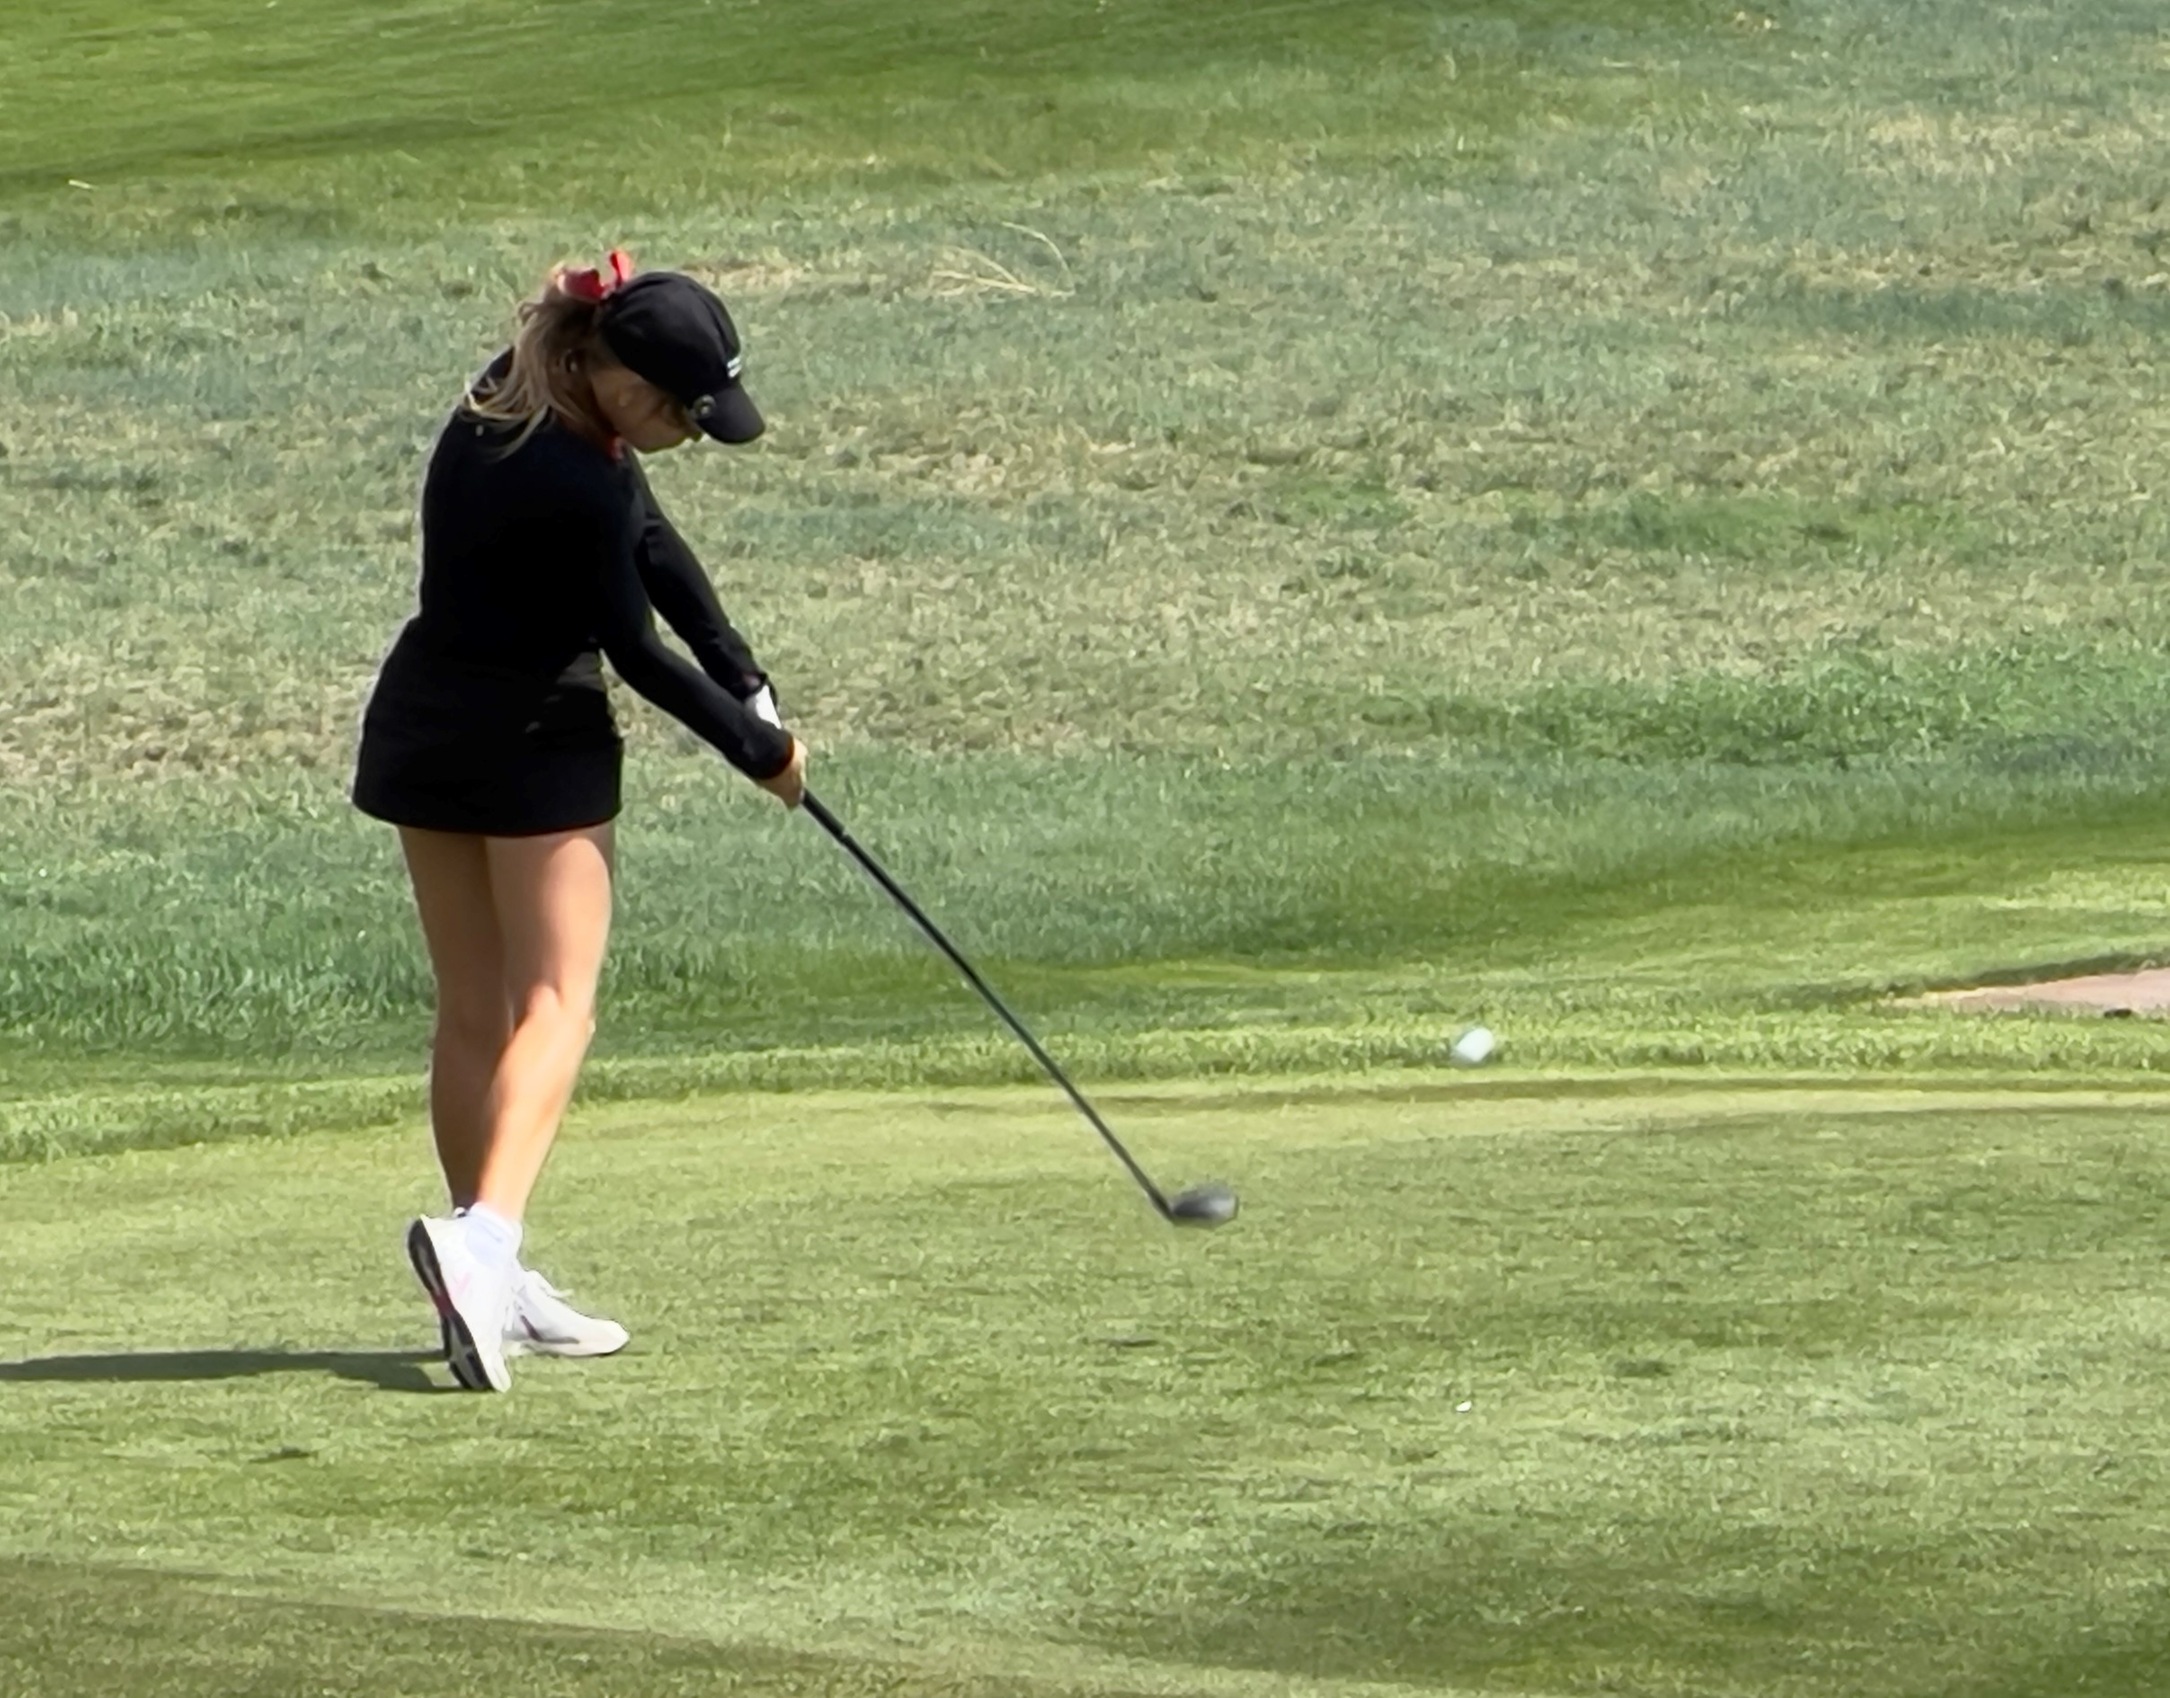 EFSC women's golf team moves to eighth at halfway point of national tournament